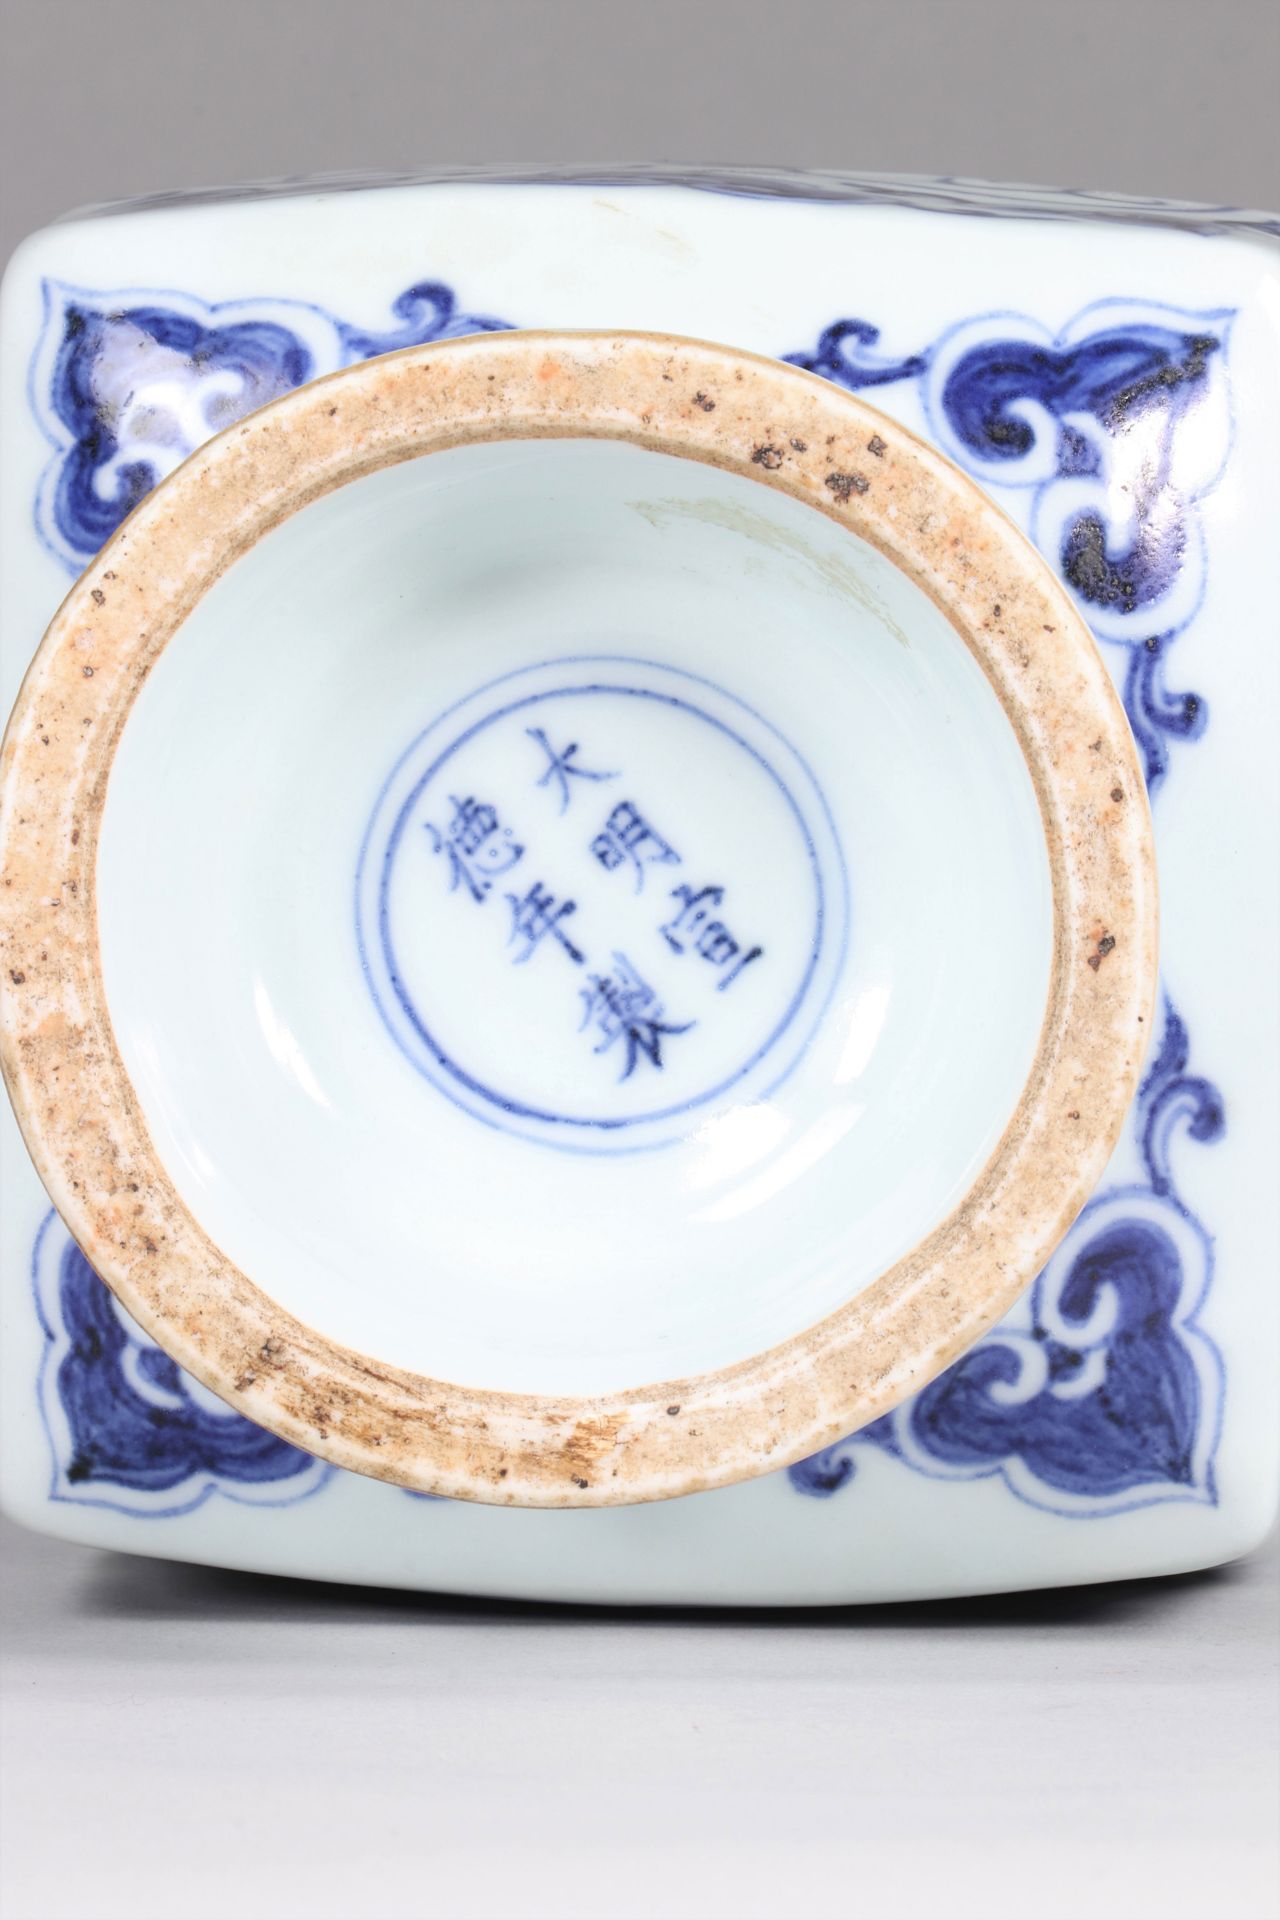 China faceted Ming vase, mark of Xuande, with Quranic quotes in cobalt blue - Image 9 of 9